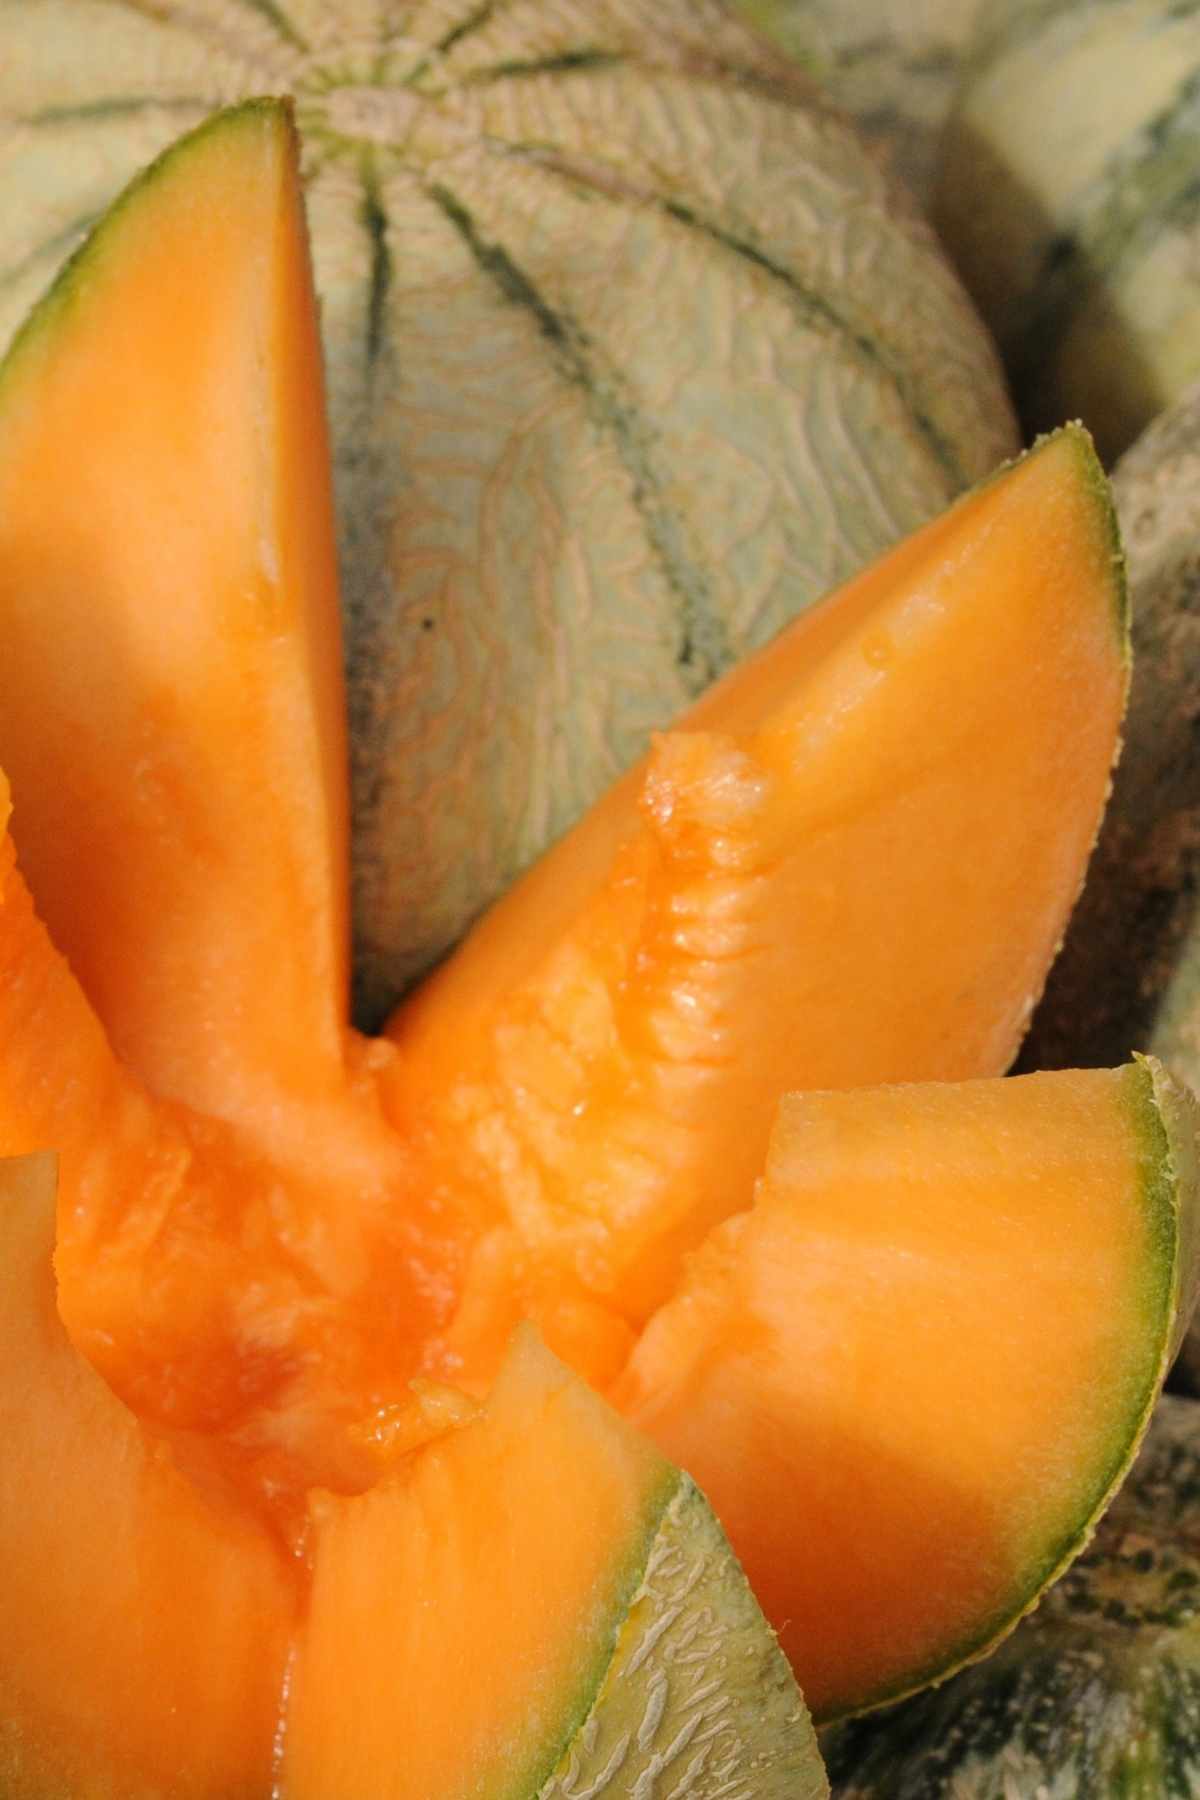 With the summer months fast approaching, there’ll be more options to try at local fruit stands. One of the fruits we really enjoy is Muskmelon. If you haven’t tried muskmelon, it’s a close cousin to cantaloupe.